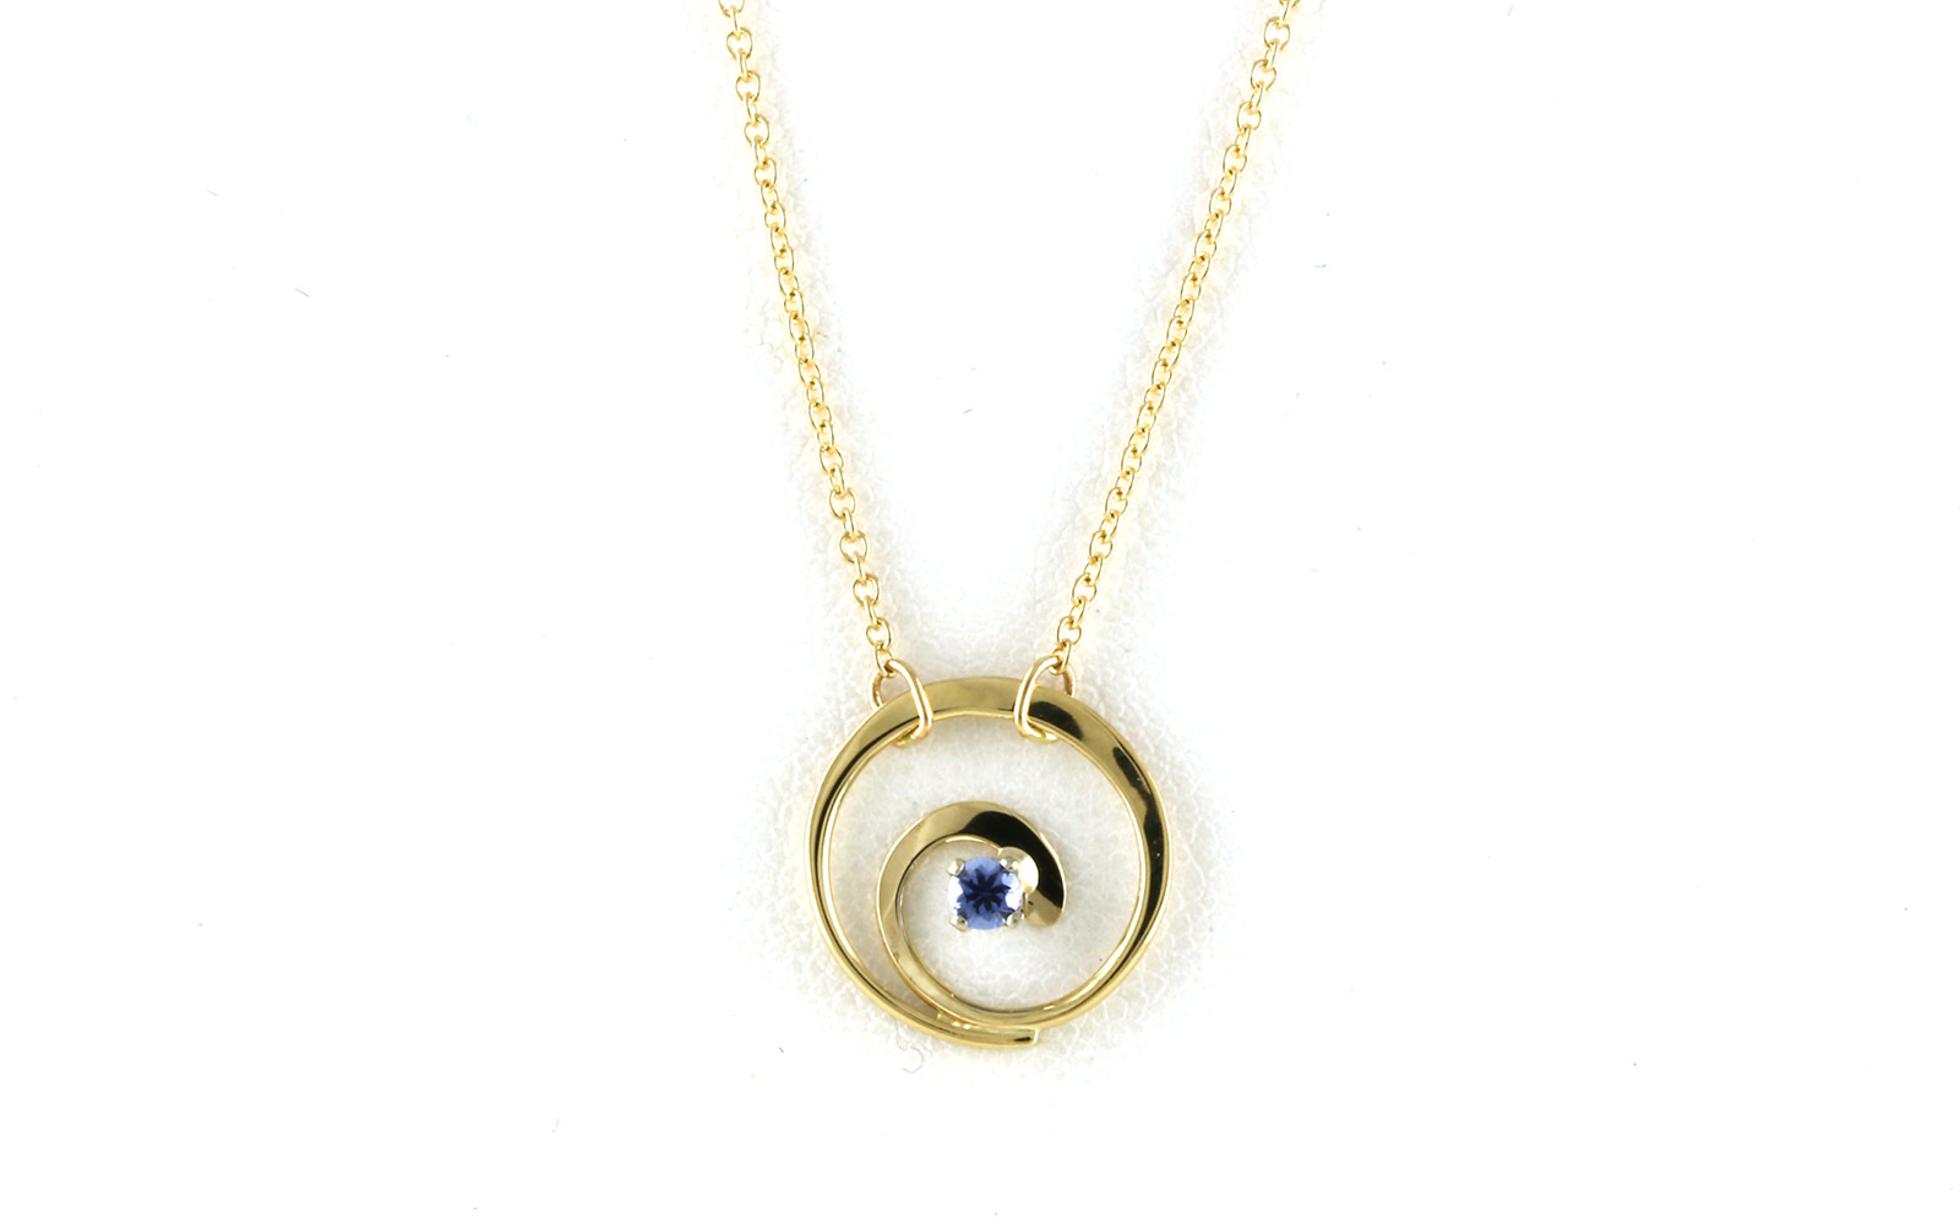 Spiral Design Montana Yogo Sapphire Necklace in Yellow Gold